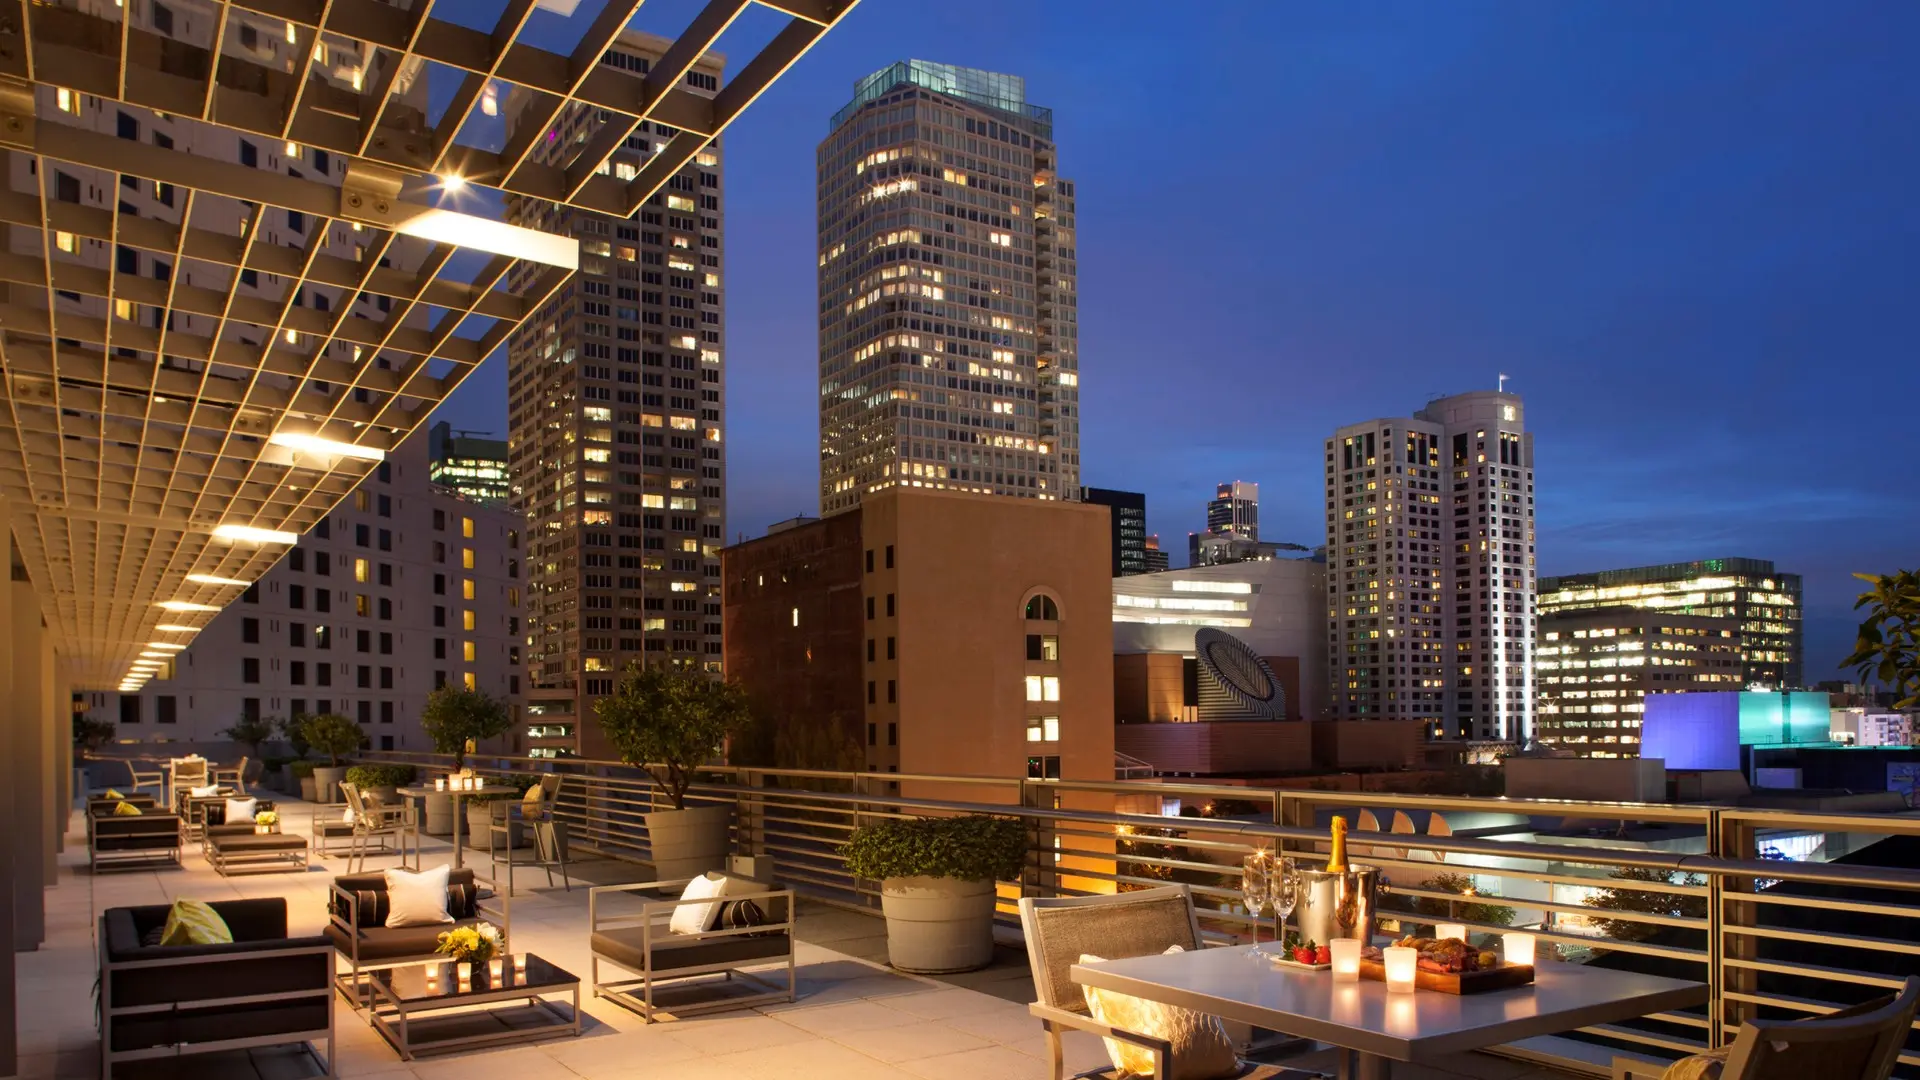 Hotel review Location' - Four Seasons Hotel San Francisco - 2